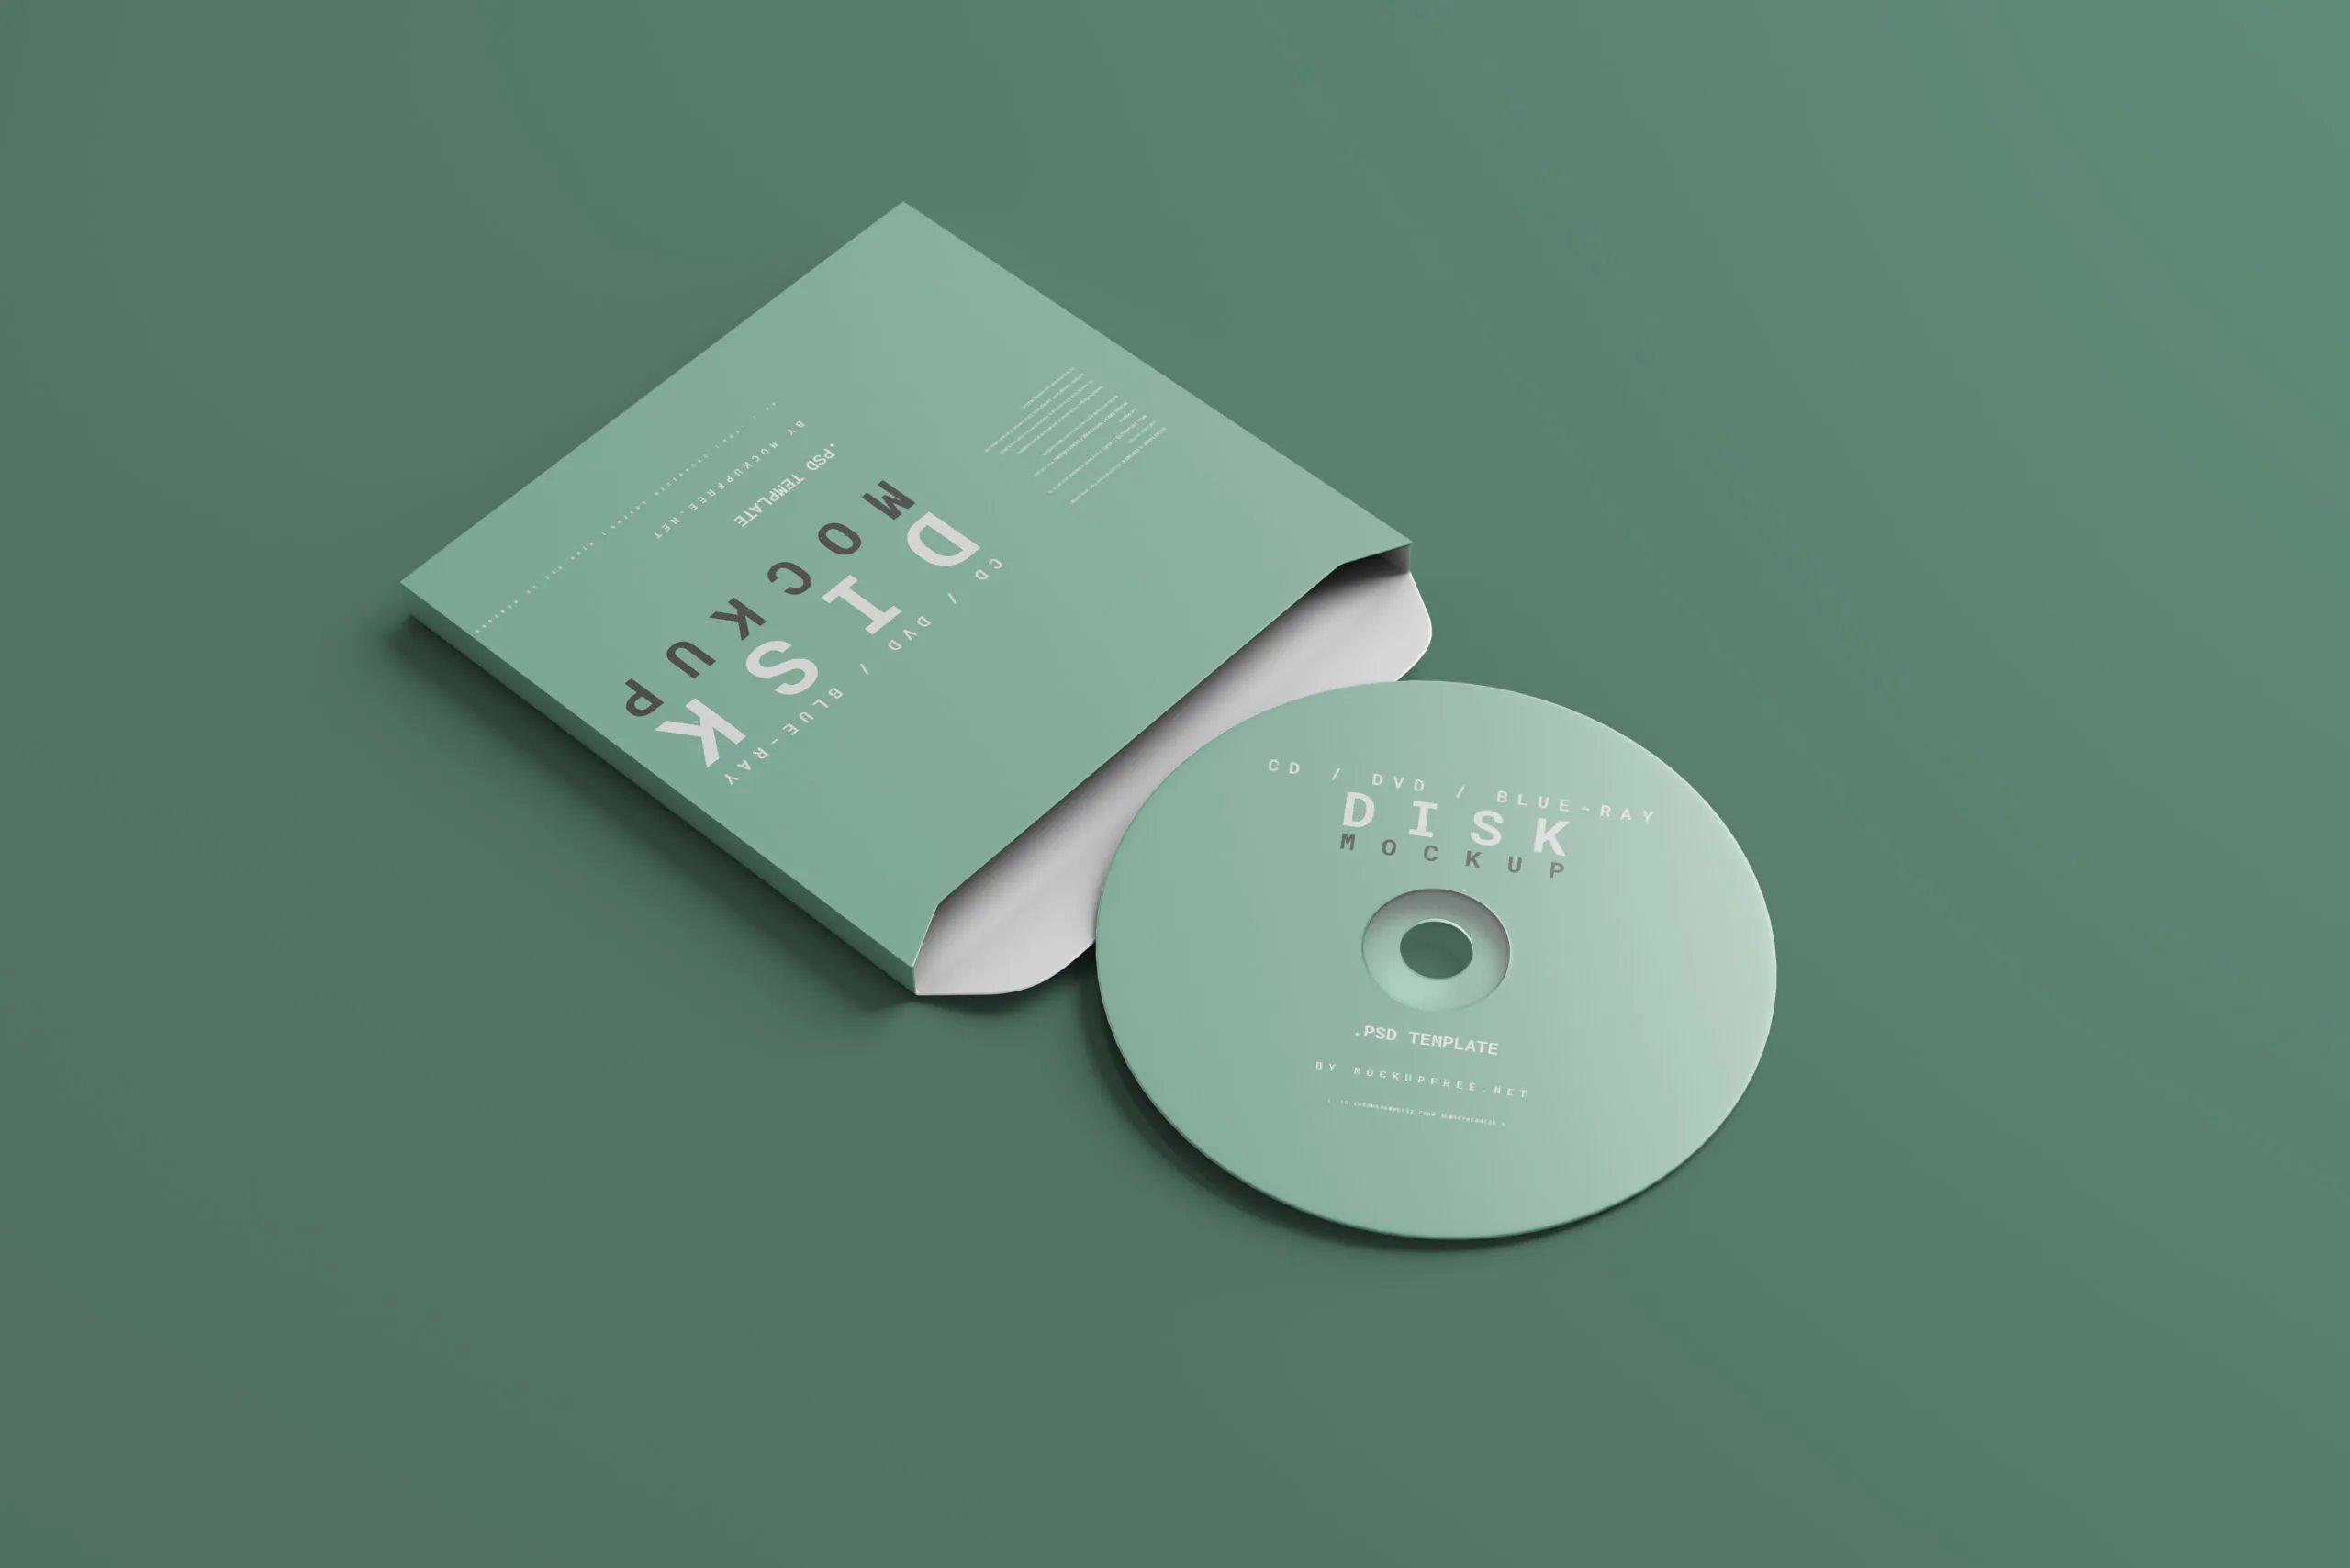 5 Disc Mockups with Box Packaging in Various Sights FREE PSD